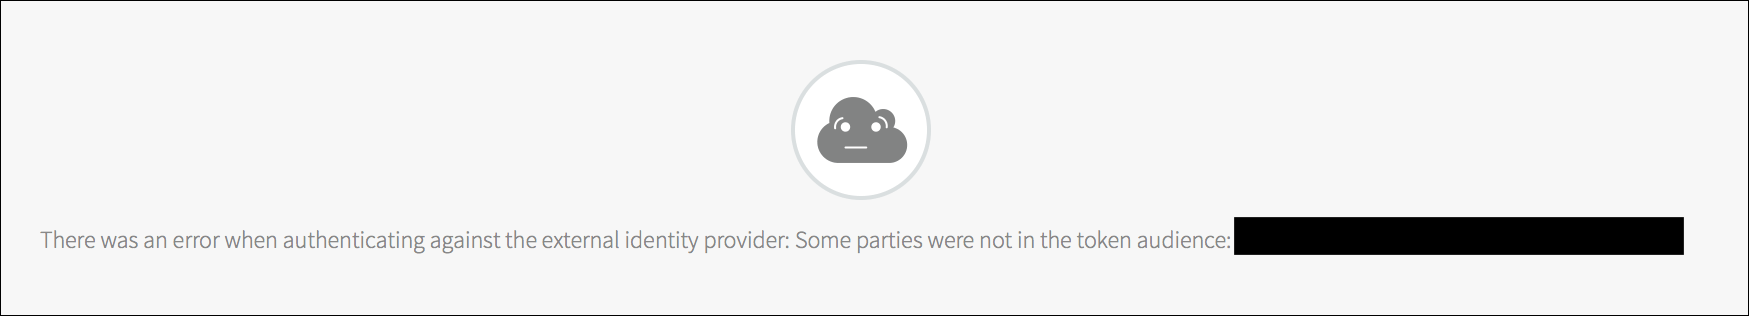 The partially redacted
error message page reads, There was an error when authenticating against
the external identity provider: Some parties were not in the token audience (redacted).